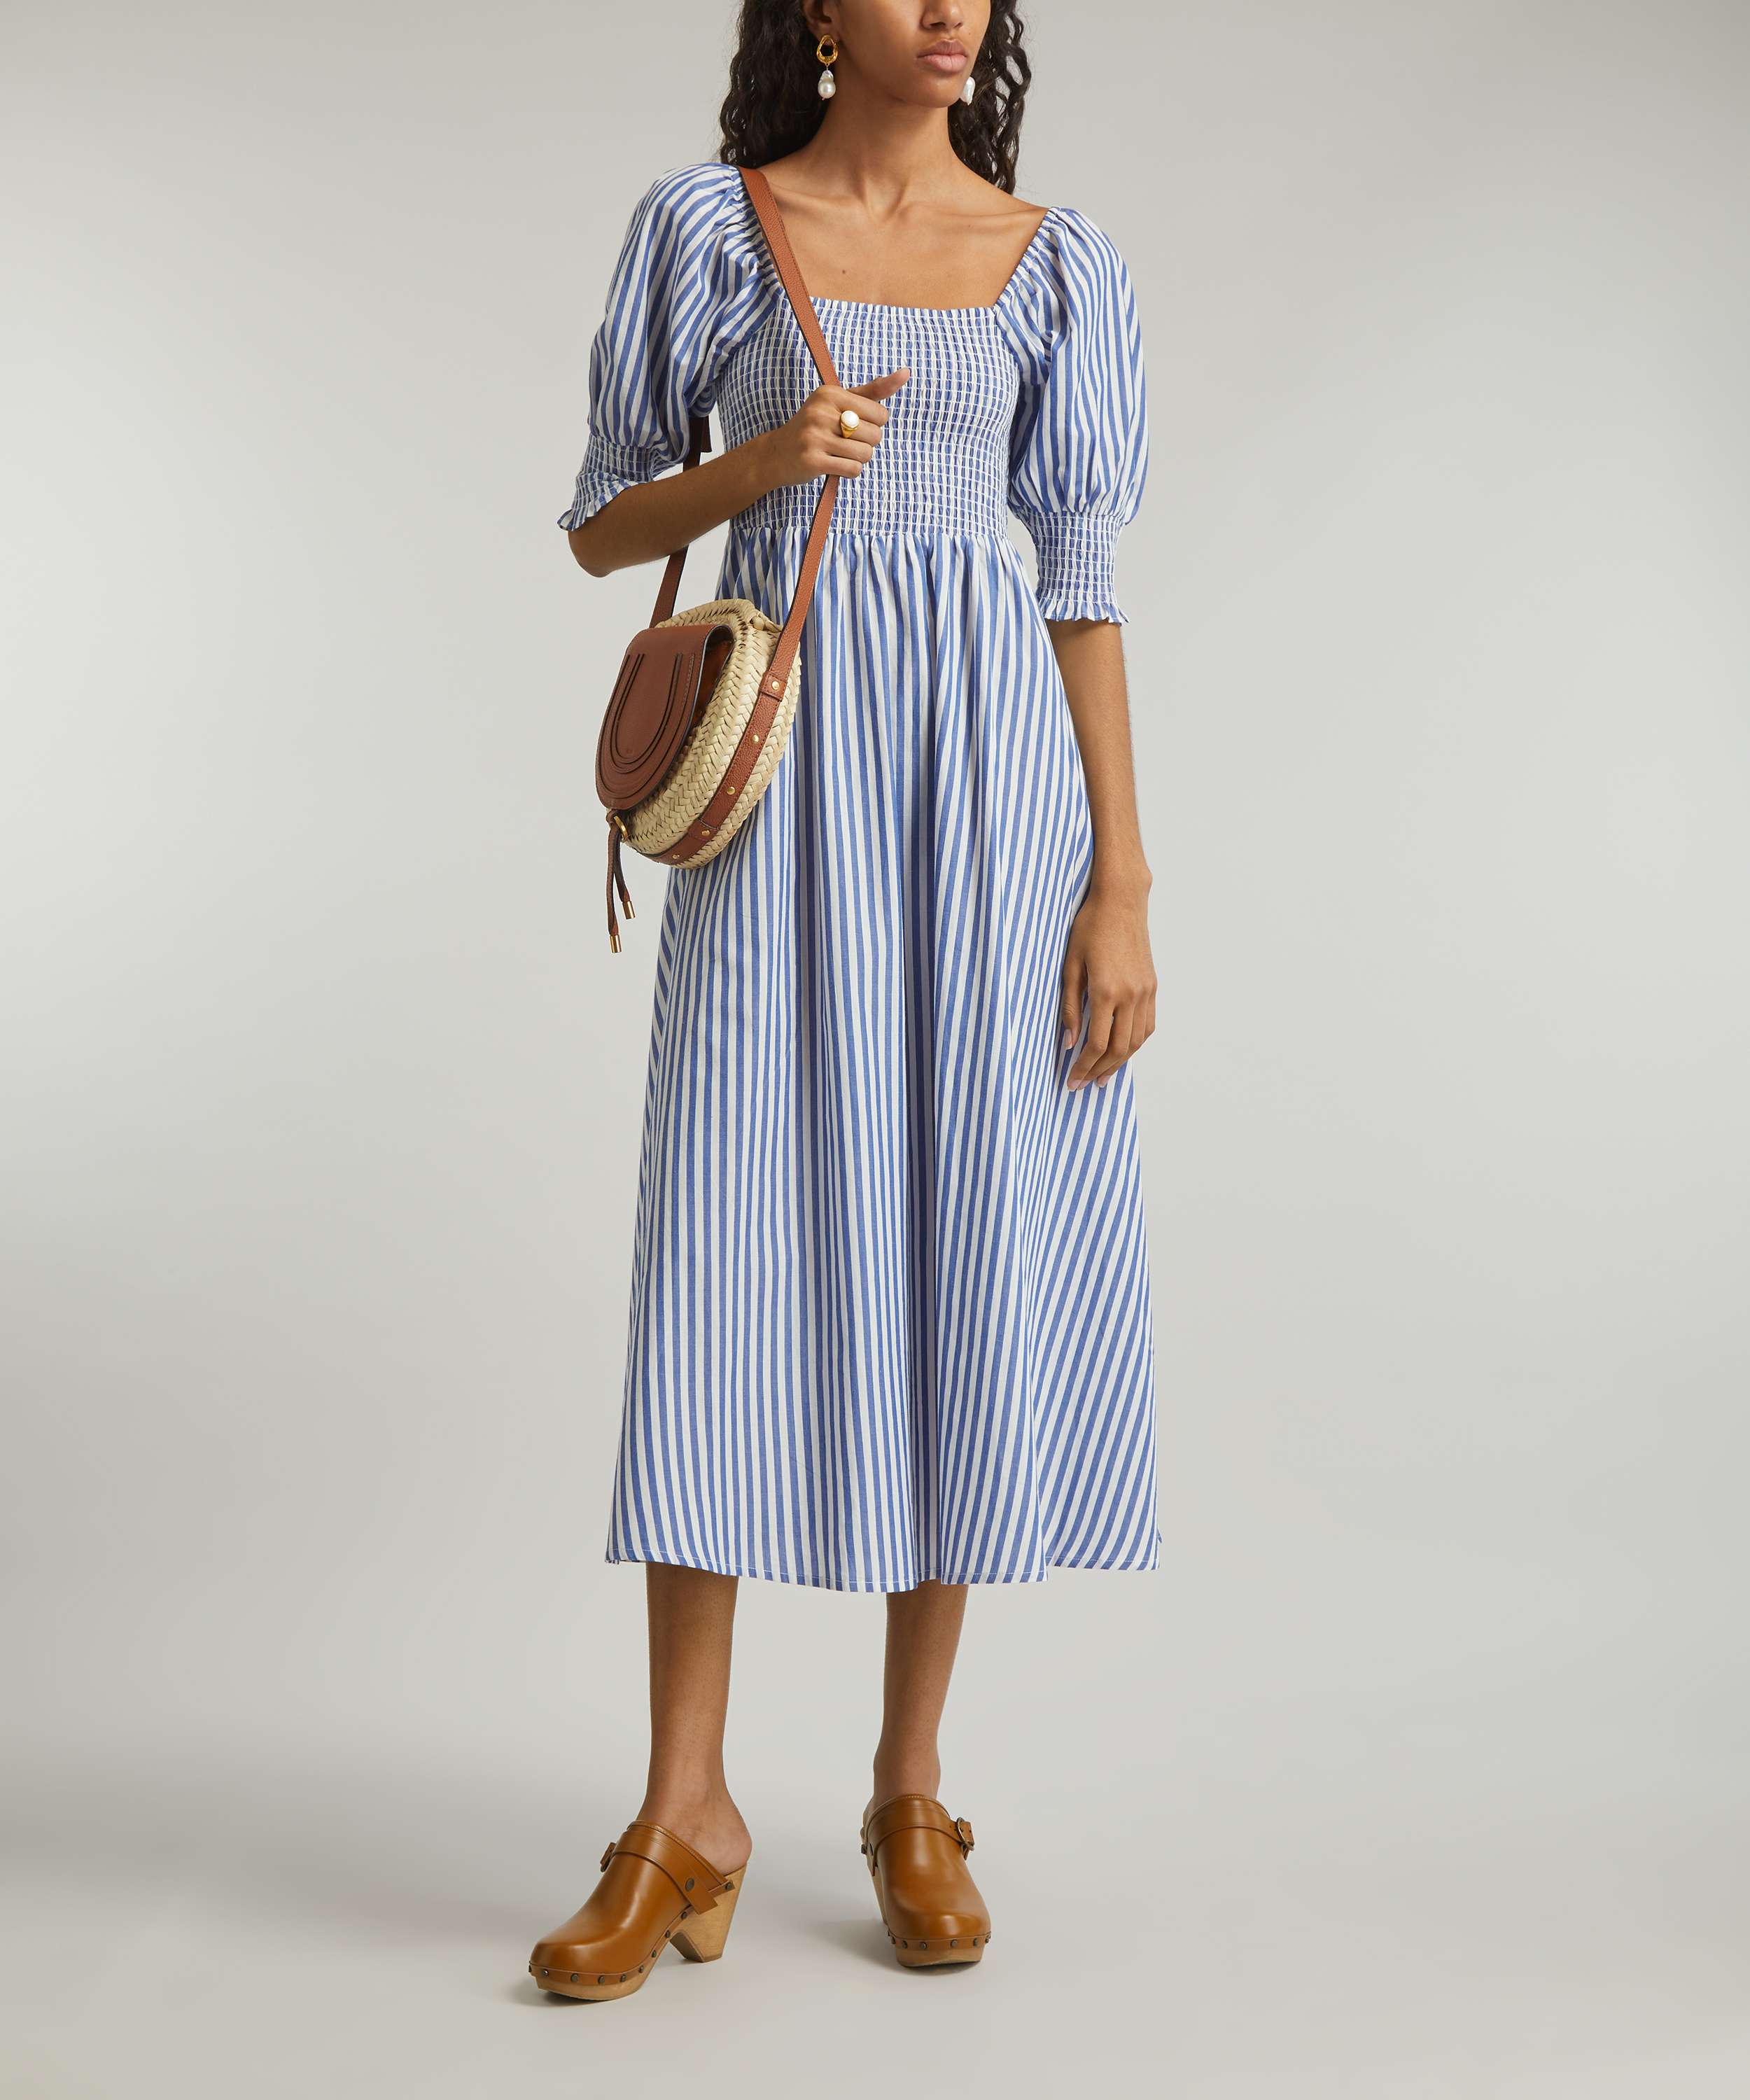 Away From Blue, Aussie Mum Style, Away From The Blue Jeans Rut: Navy  Striped Dresses, Scarves and Ankle Boots With Pink Bag